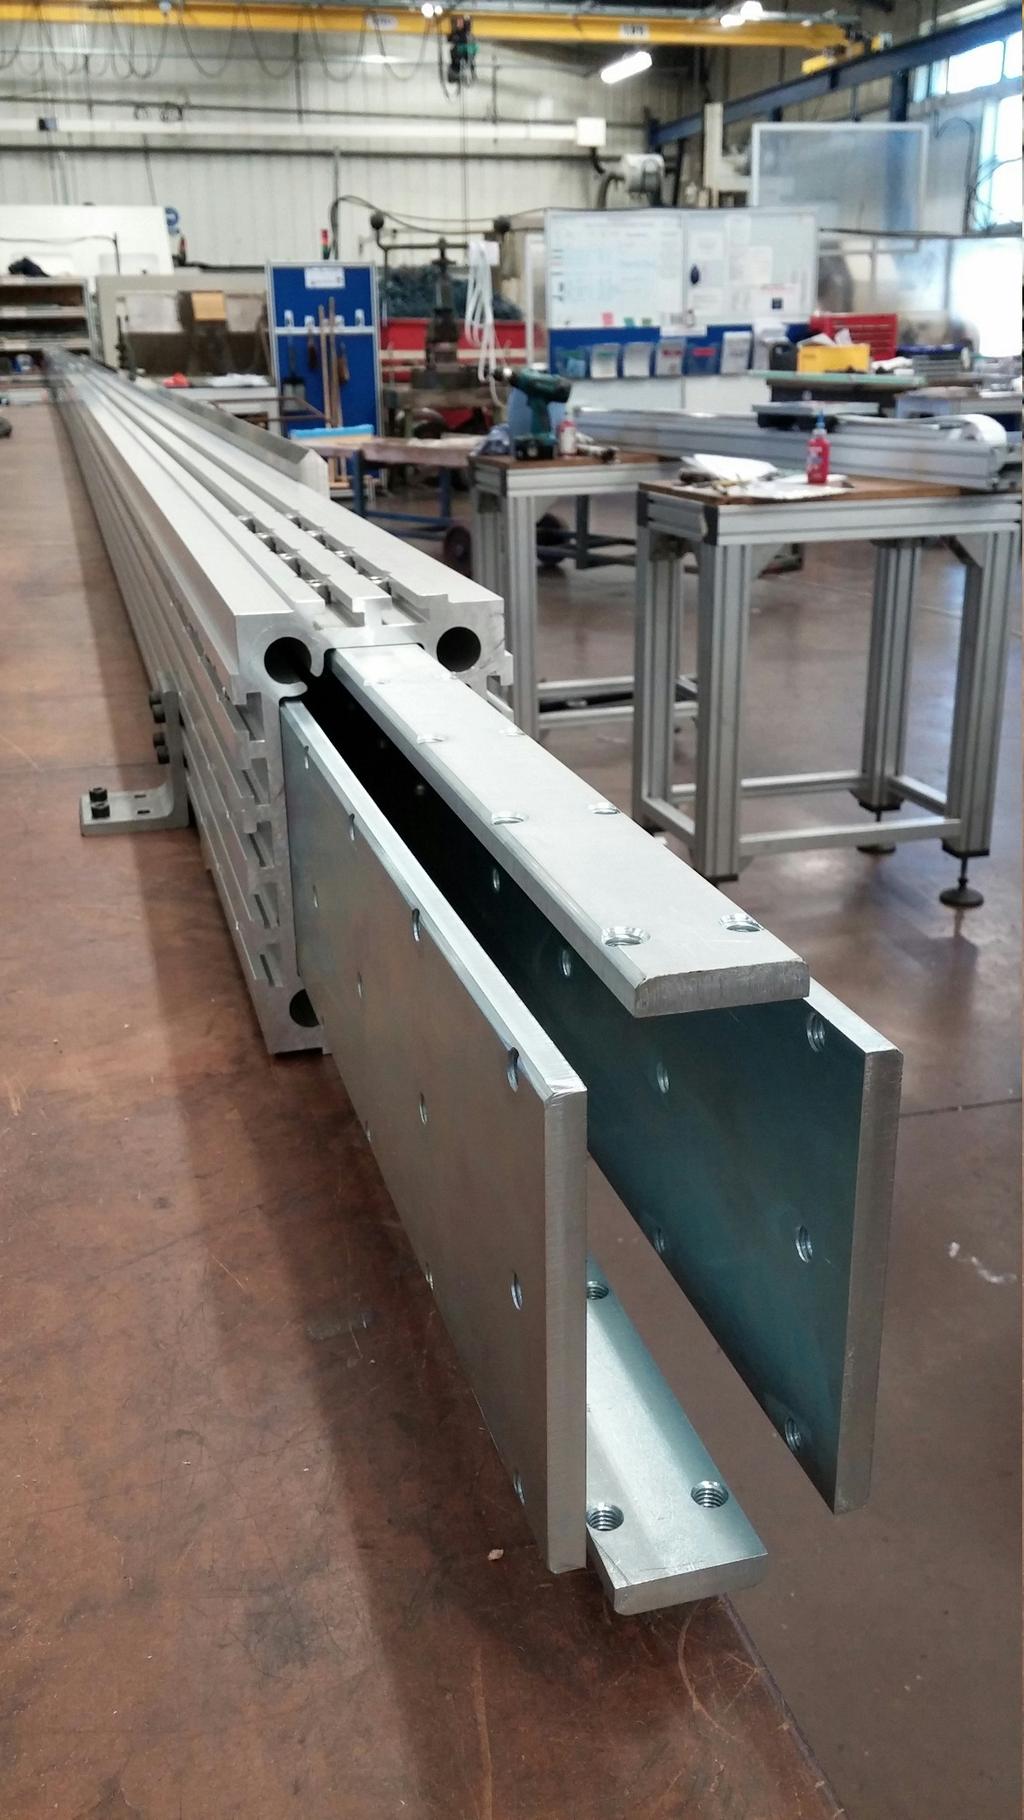 LENGTHENING THE X AXIS A common trend for users is to want to lengthen the gantry after the system has been operational for some time.